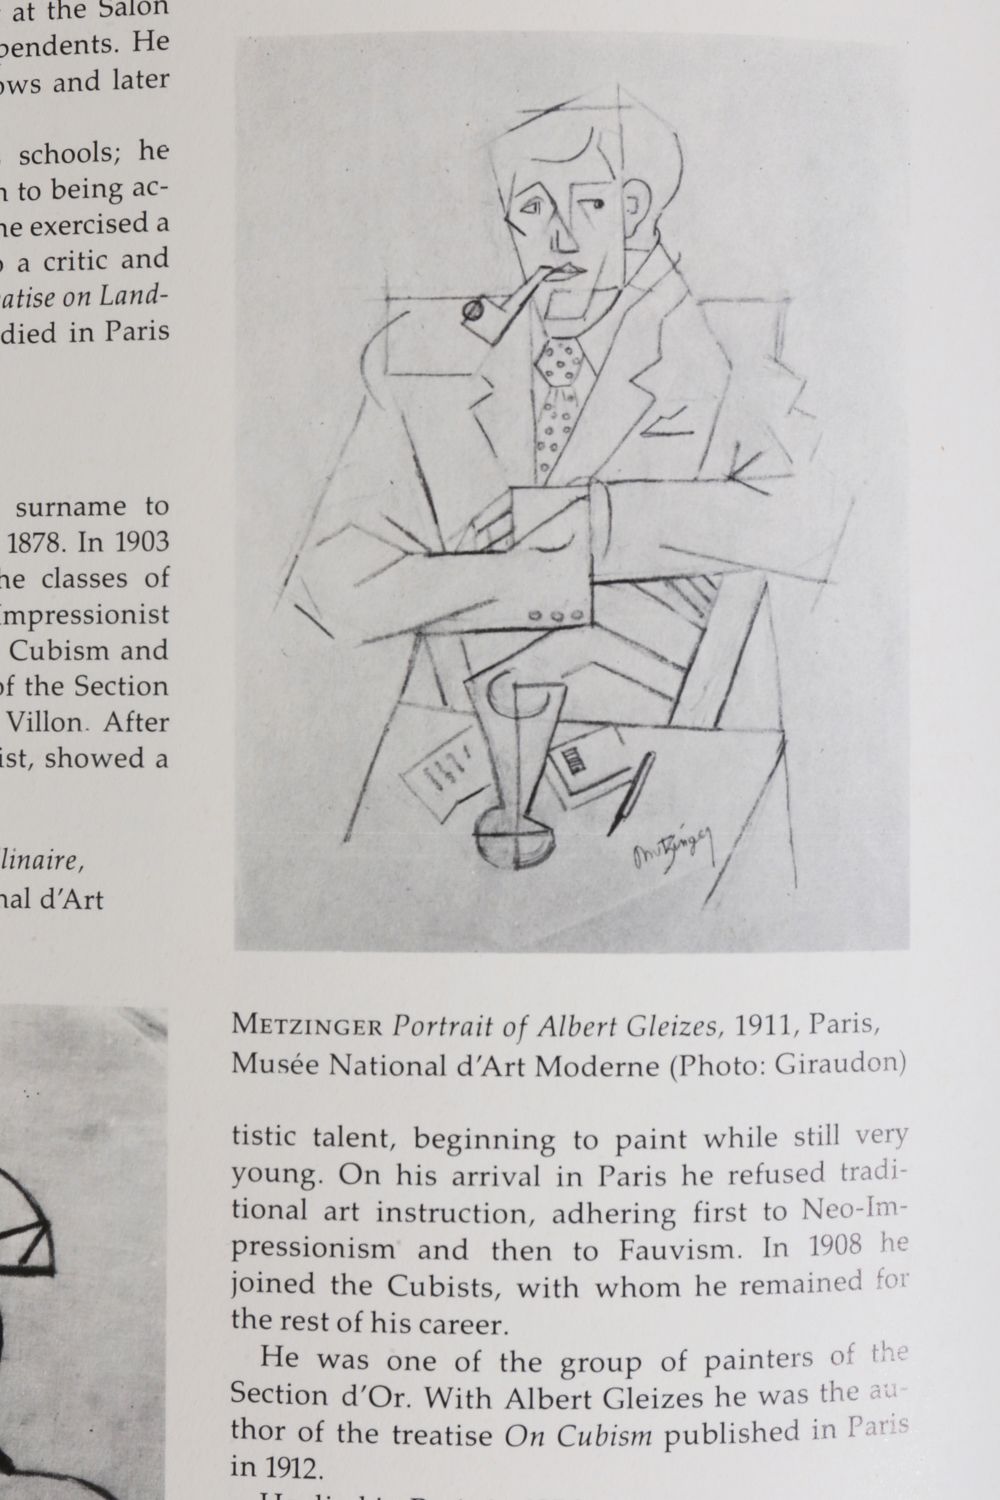 Picasso and the Cubists Book - 3